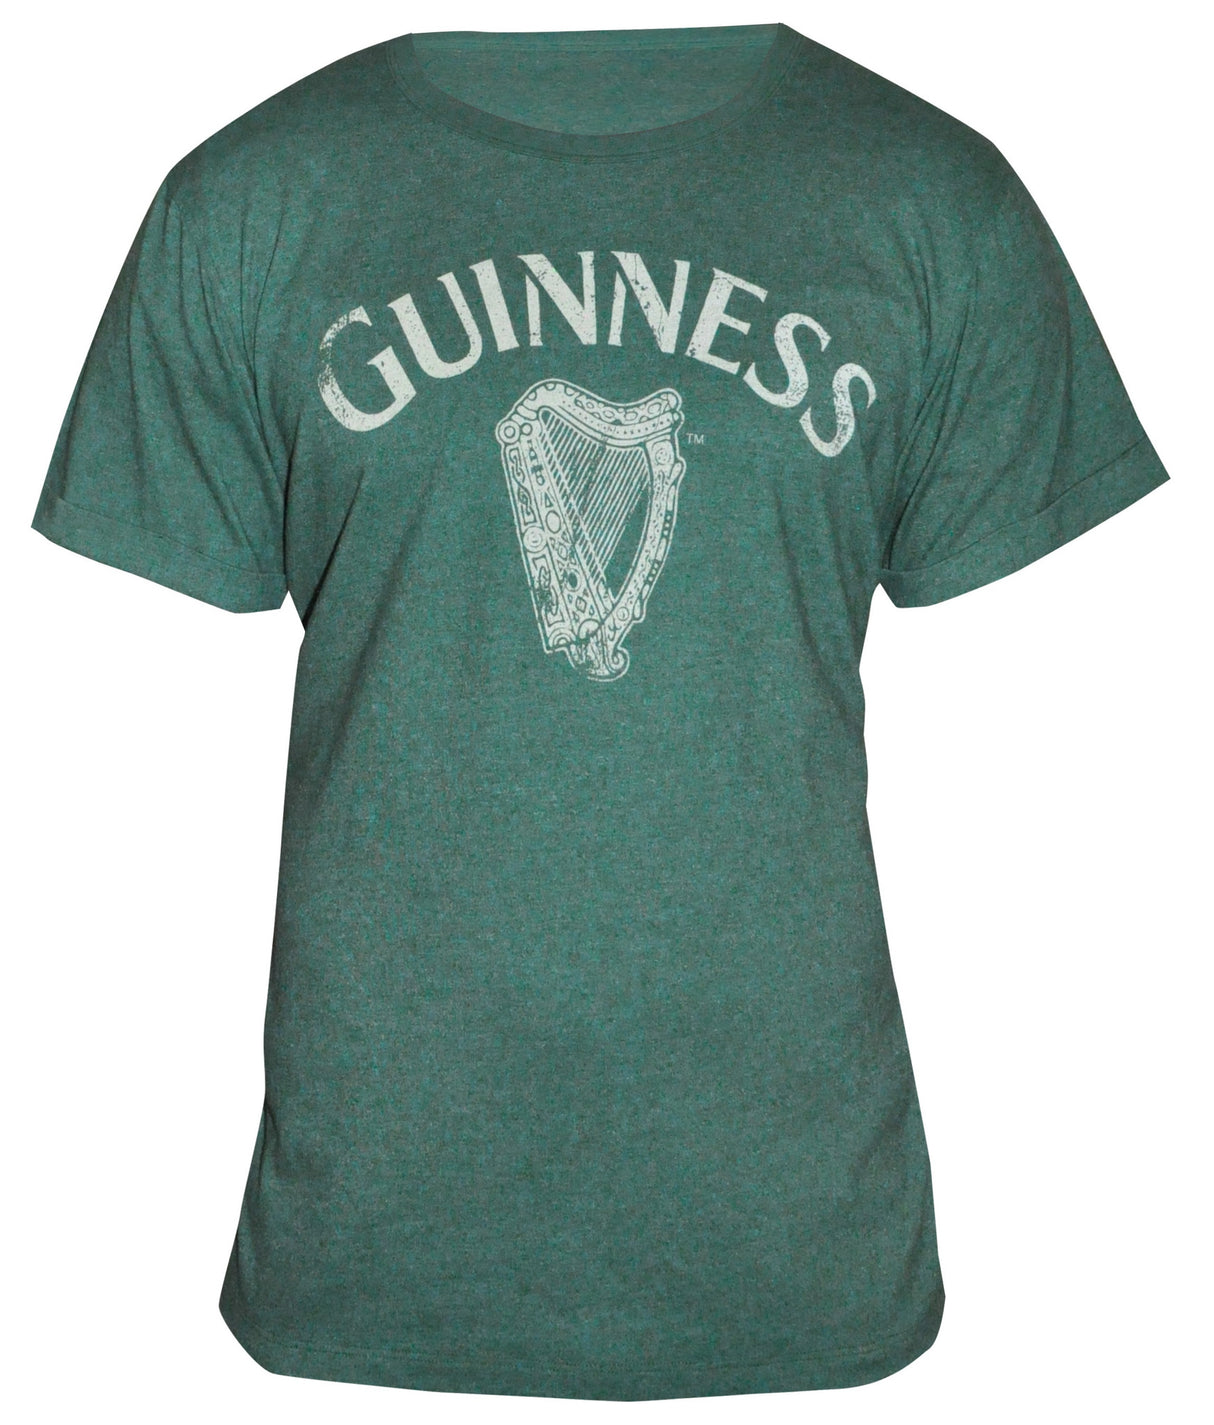 Green Guinness and Harp T-shirt